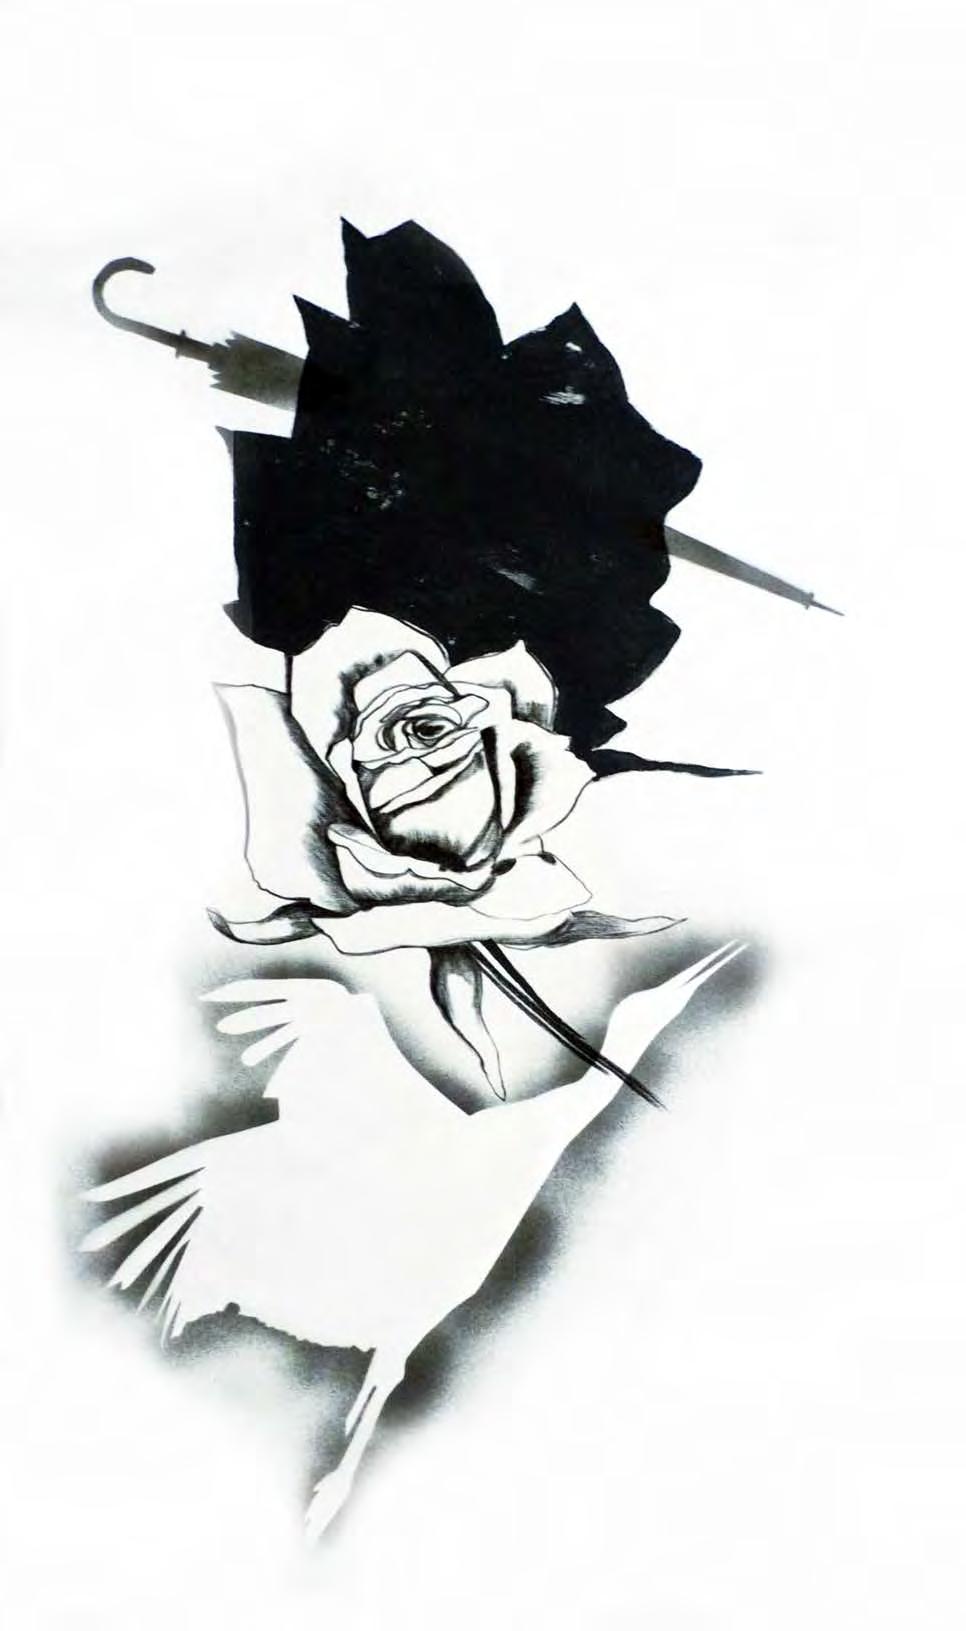 The roses with their shadows make a composition together with